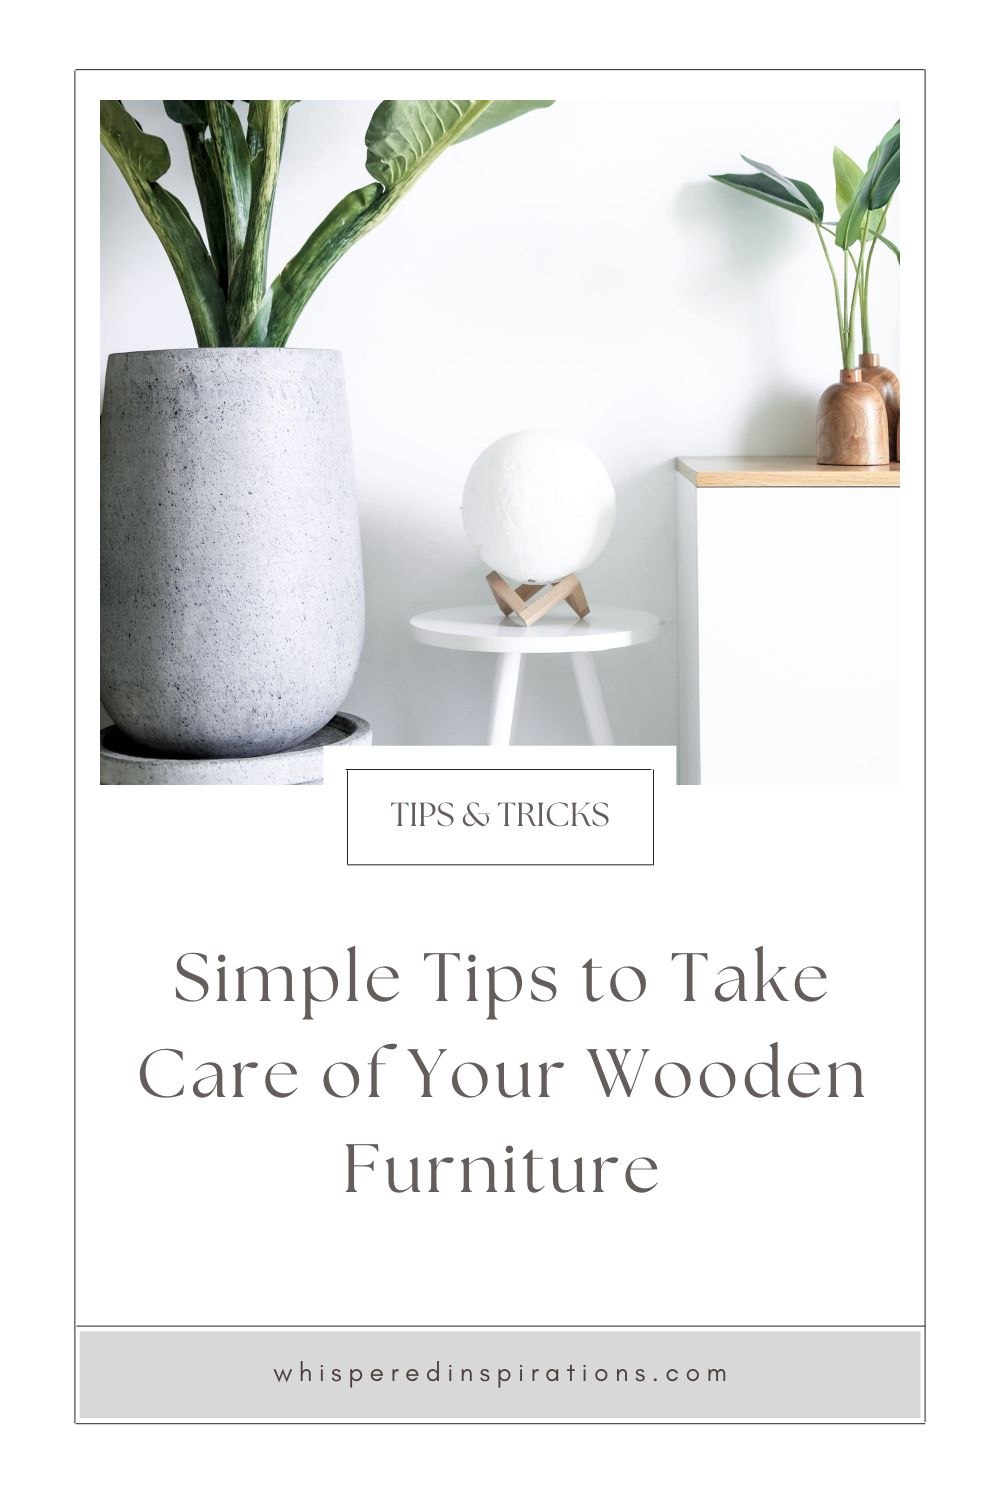 A fiddle leaf plant in a stone vase. There is a console table. This article covers simple tips to take care of your wooden furniture.